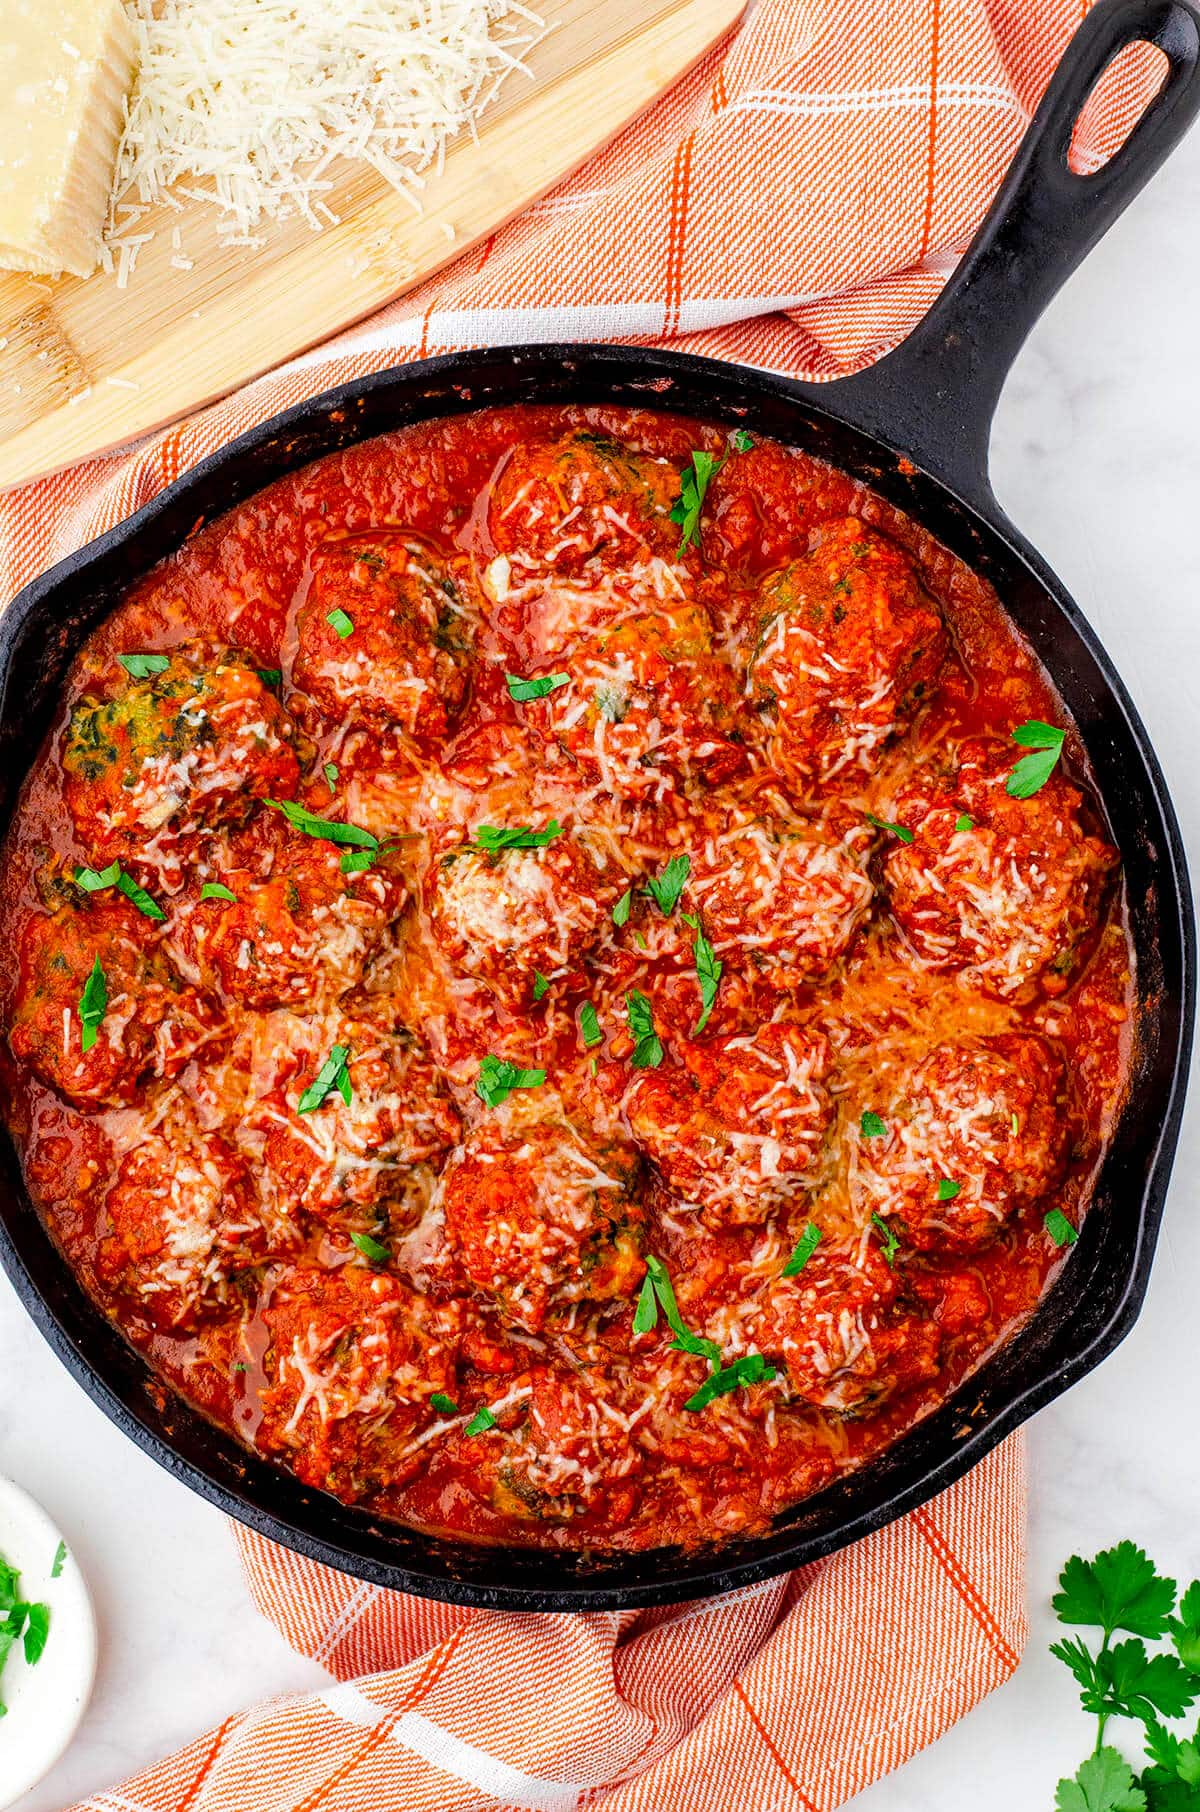 Meatballs in skillet covered with red sauce.